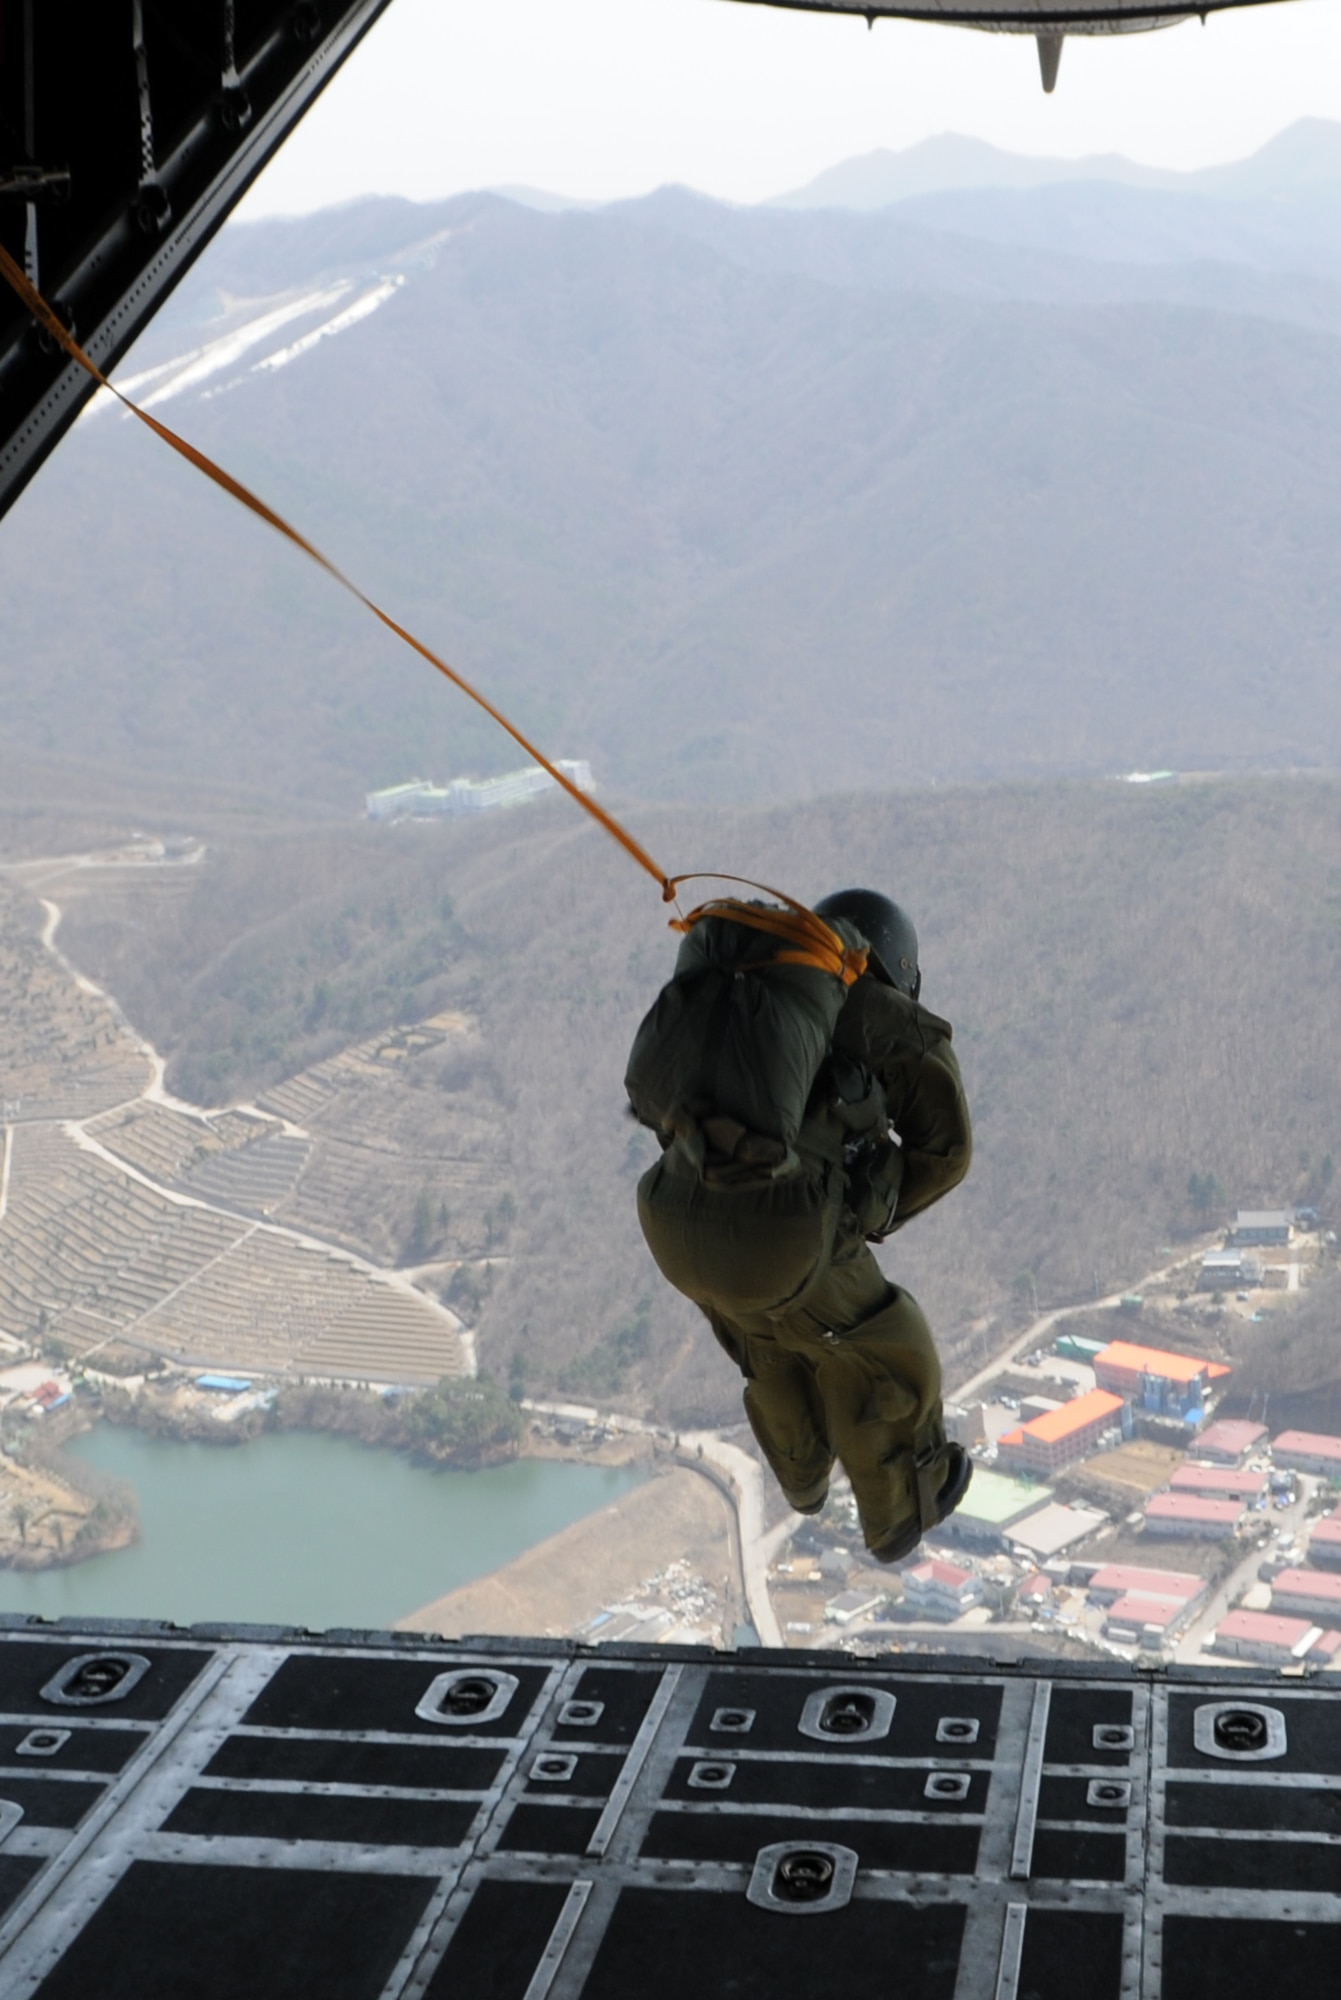 OVER MAE SAN RI, Republic of Korea -- A member of the Republic of Korea Army jumps from the ramp of a 17th Special Operations Squadron MC-130P Combat Shadow here April 2. More than 70 U.S. and ROK Army soldiers jumped from two MC-130P's as part of a friendship jump between the two armies. (U.S. Air Force photo by Tech. Sgt. Aaron Cram)